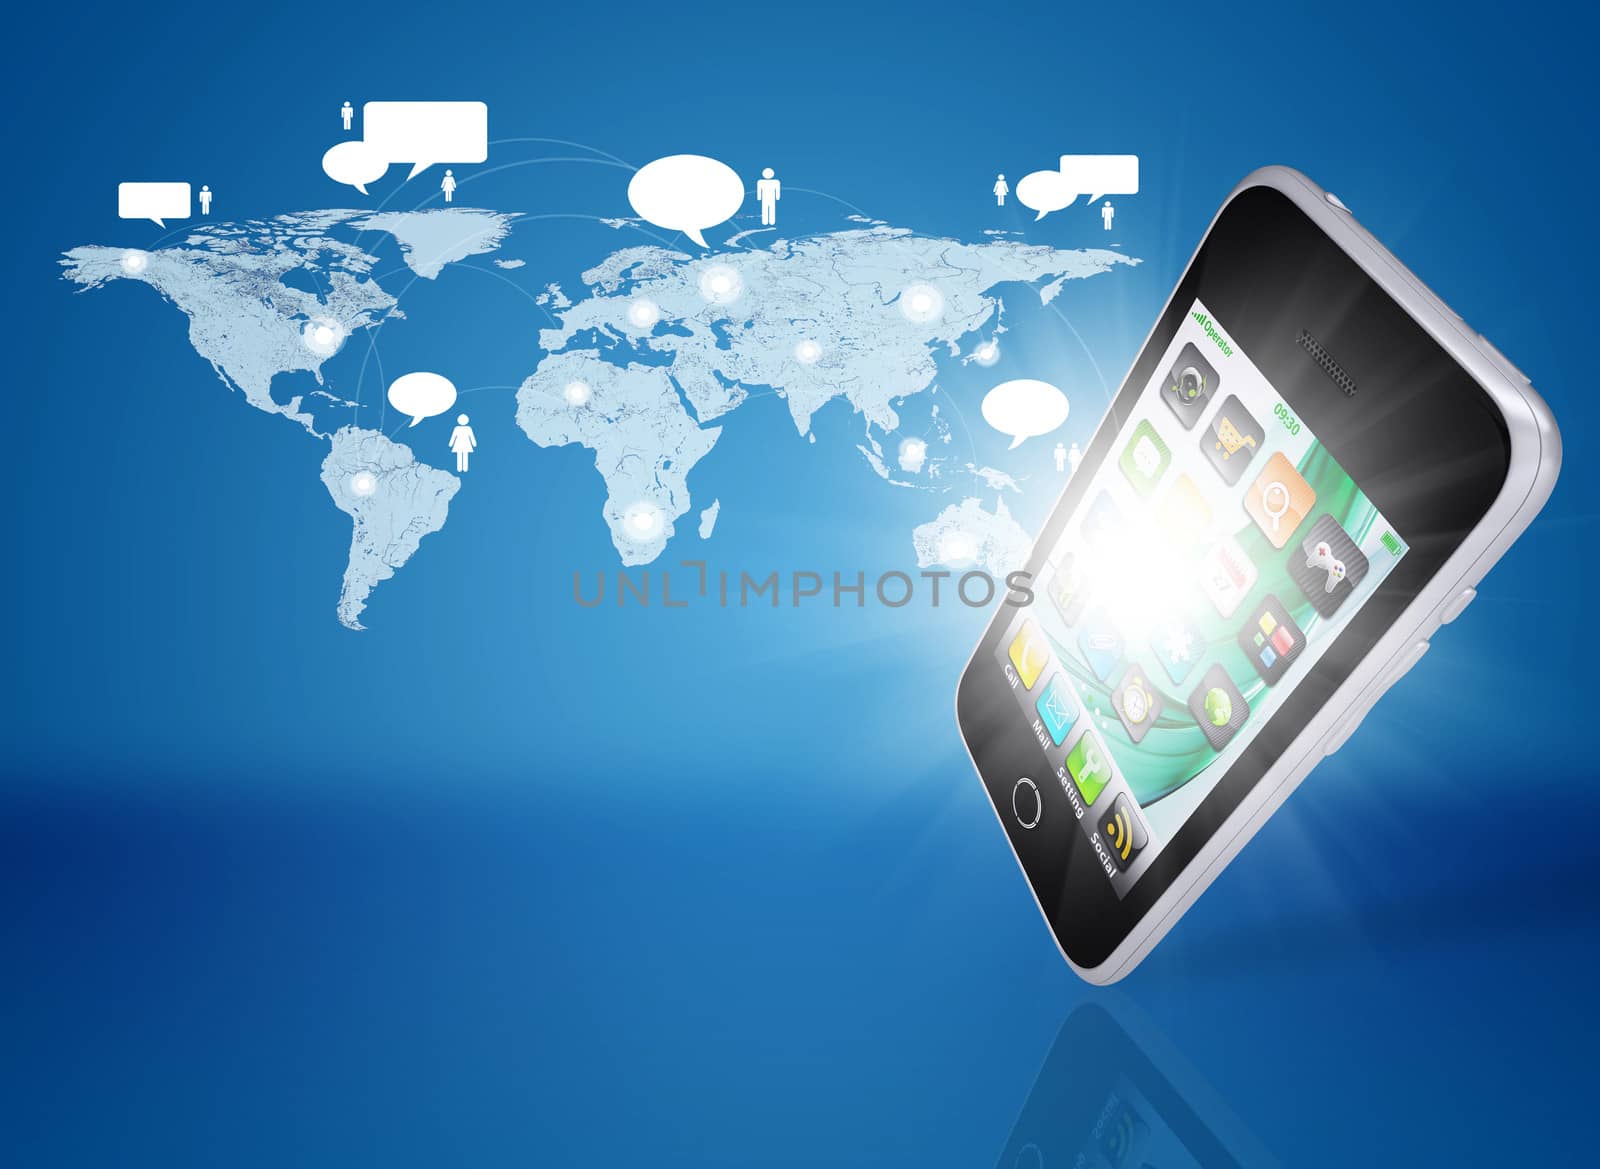 Smartphone and world map with contacts. The concept of communication technologies